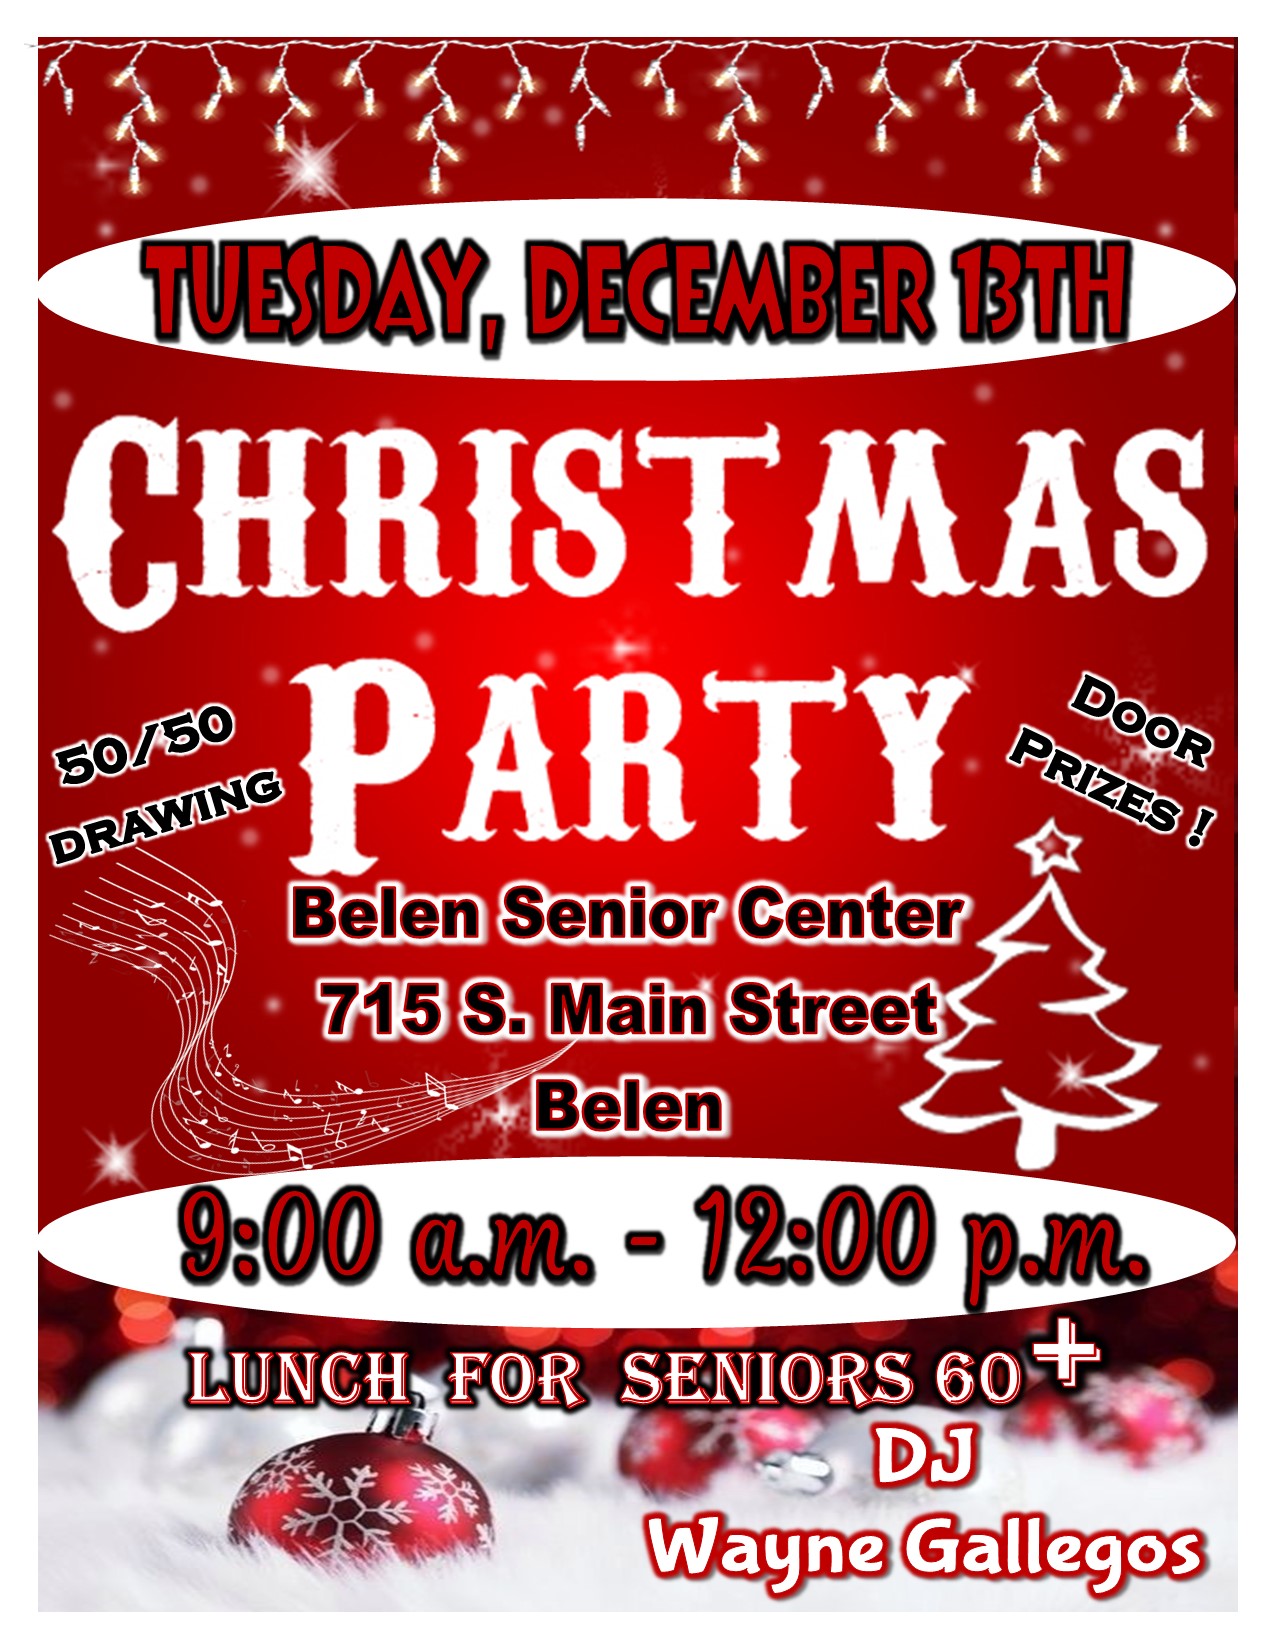 Join us for our Christams Party on Tuesday, December 13th from 9am to noon at the Belen Senior Center 715 S. Main St. There will be a 50/50 Drawing, Door Prizes, lunch for sendiors 60+, and DJ Wayne Gallegos!